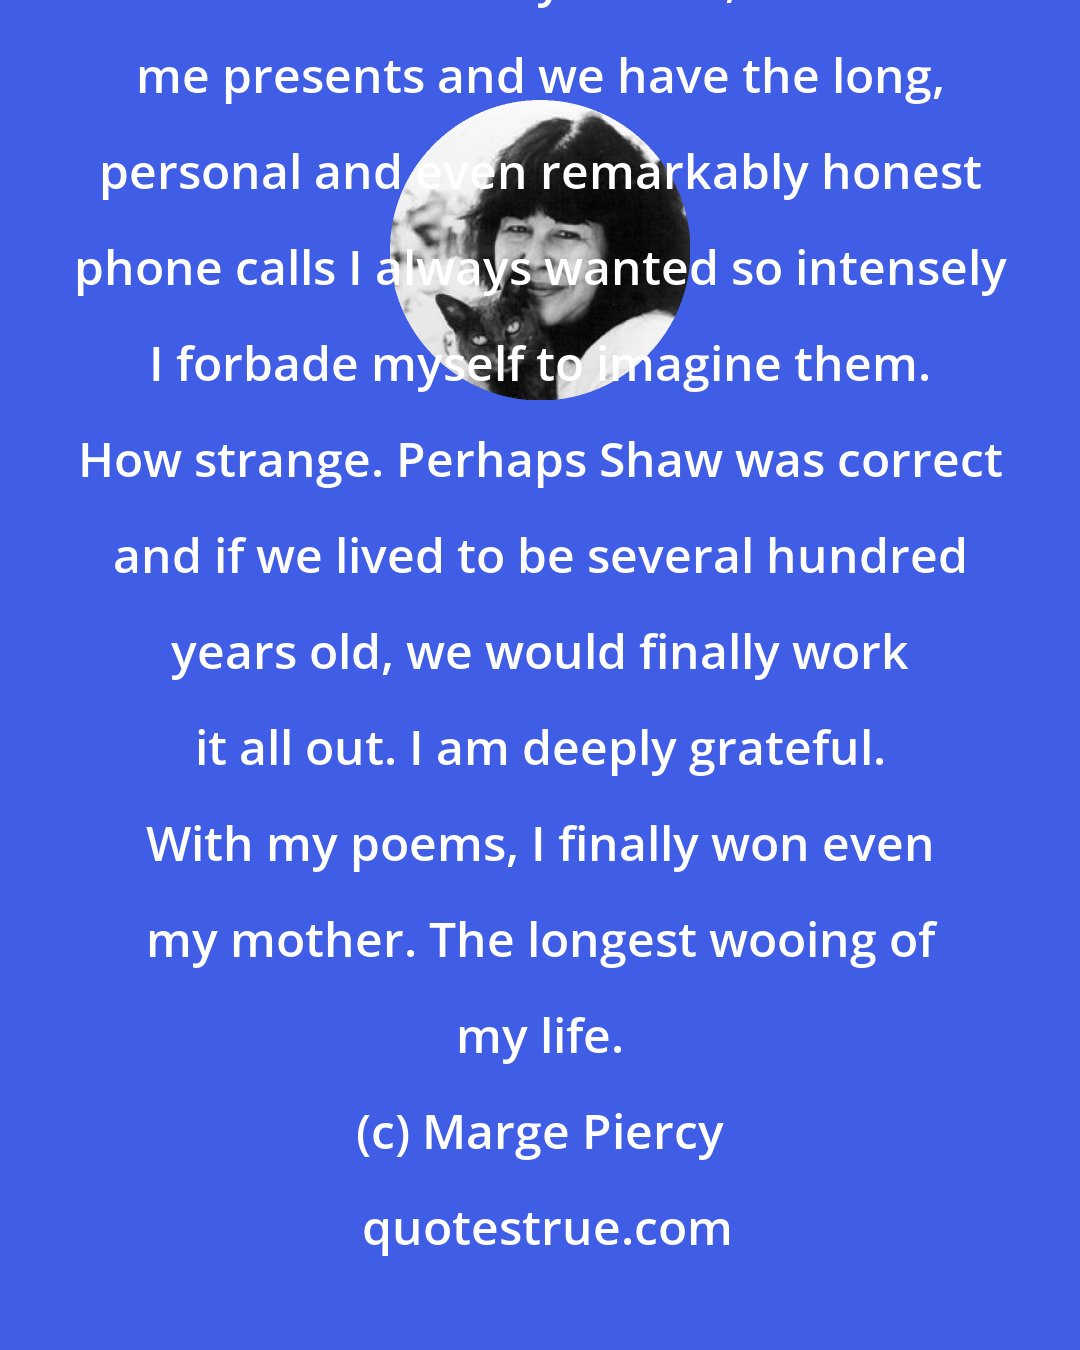 Marge Piercy: Now that I am in my forties, she [my mother] tells me I'm beautiful; now that I am in my forties, she sends me presents and we have the long, personal and even remarkably honest phone calls I always wanted so intensely I forbade myself to imagine them. How strange. Perhaps Shaw was correct and if we lived to be several hundred years old, we would finally work it all out. I am deeply grateful. With my poems, I finally won even my mother. The longest wooing of my life.